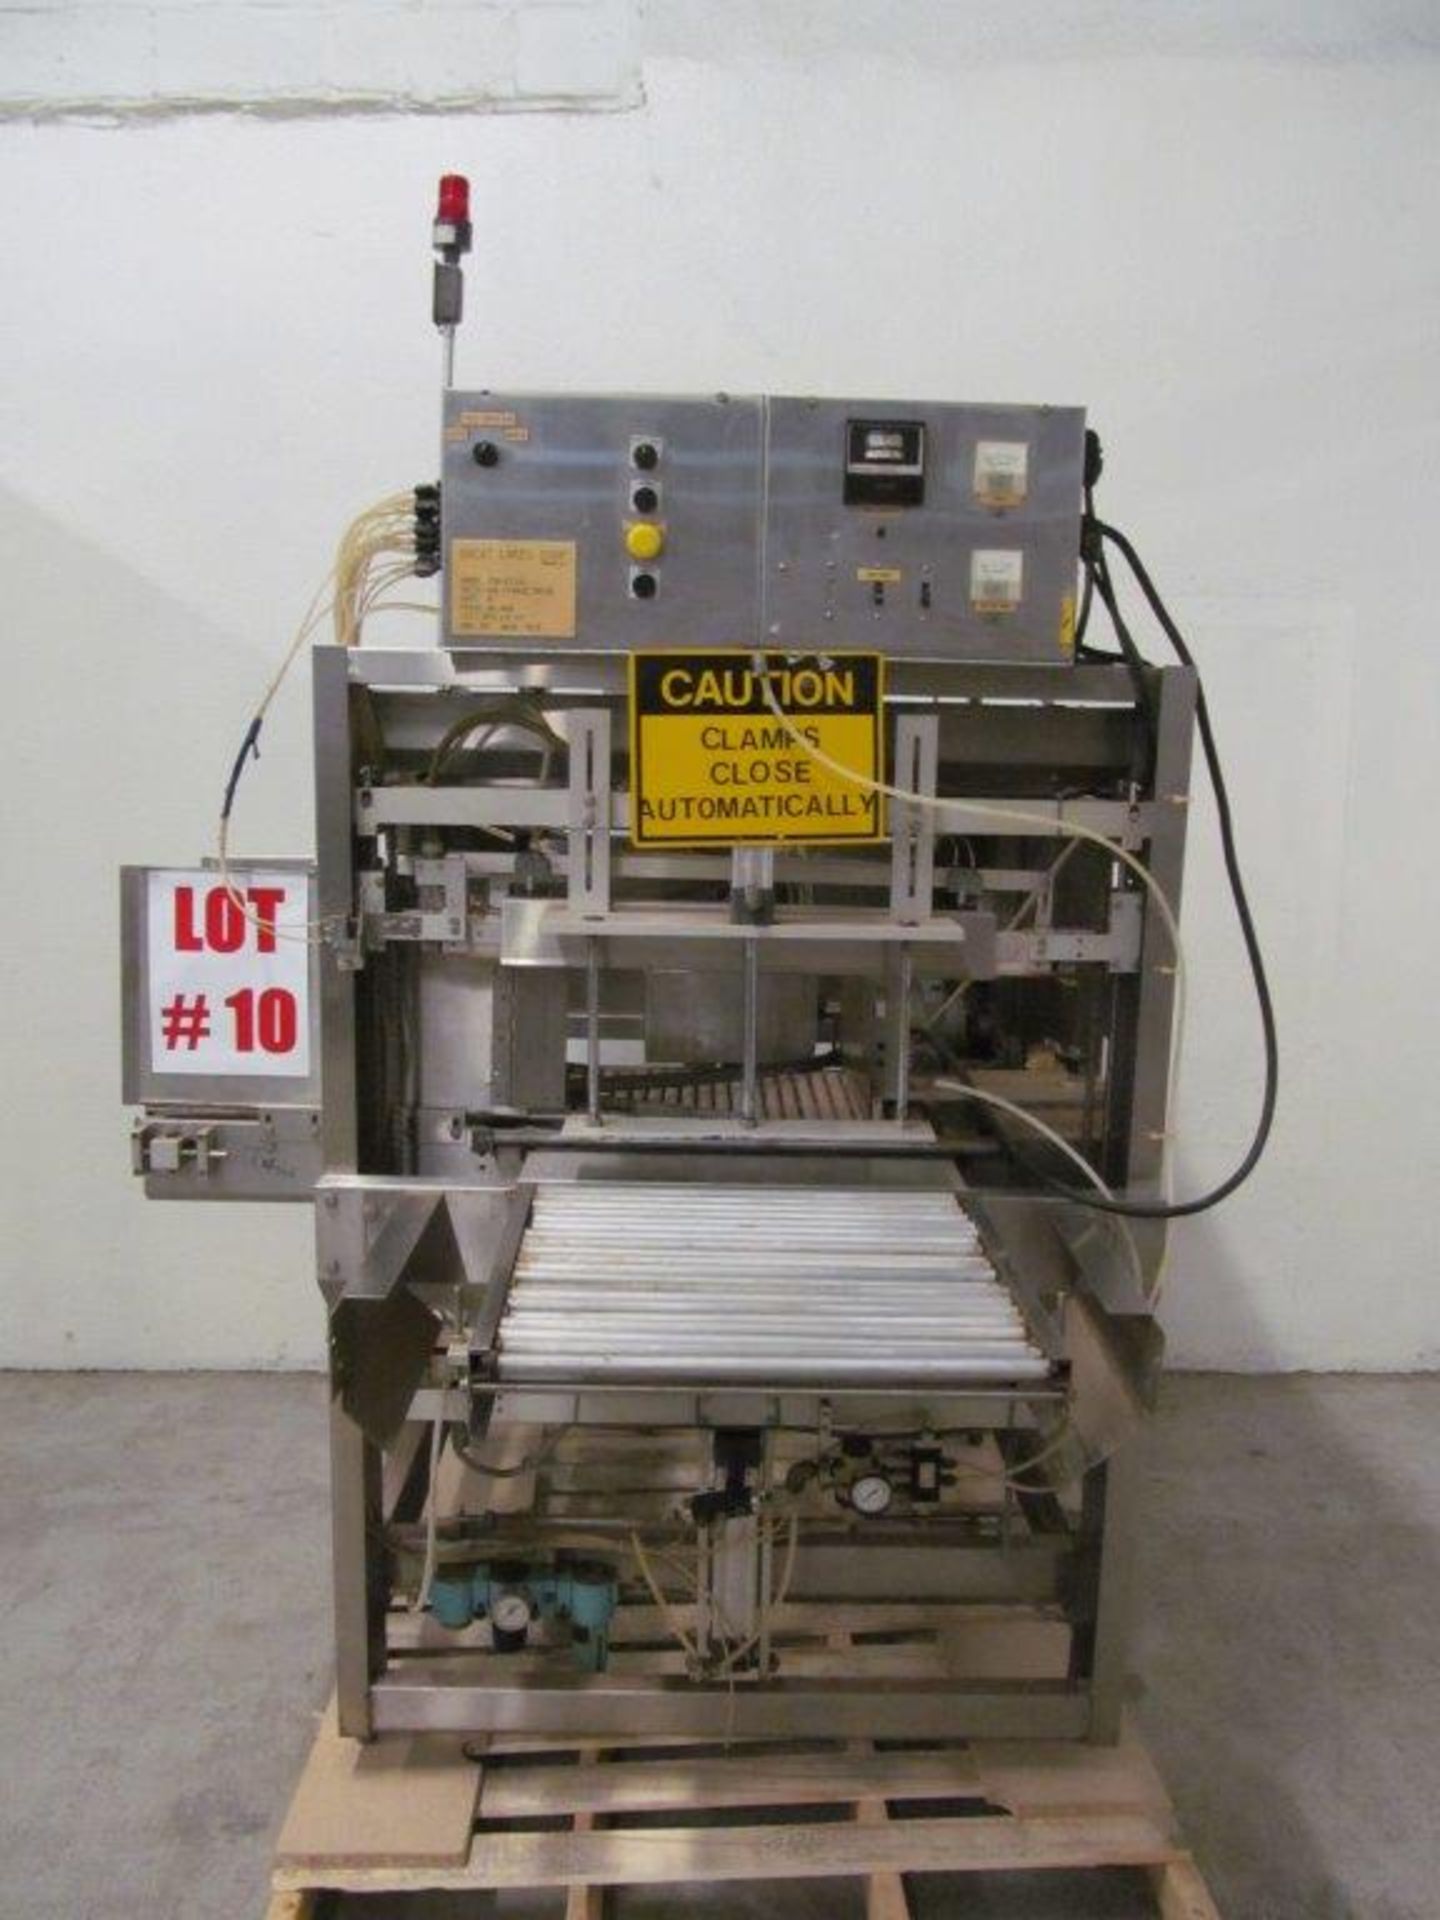 GREAT LAKES CORP. (U.S.A), S/S PLASTIC FOIL AUTO CLAMPER, MODEL 708-27SS, S/N 429, ELECTRICS 120V/ - Image 2 of 6